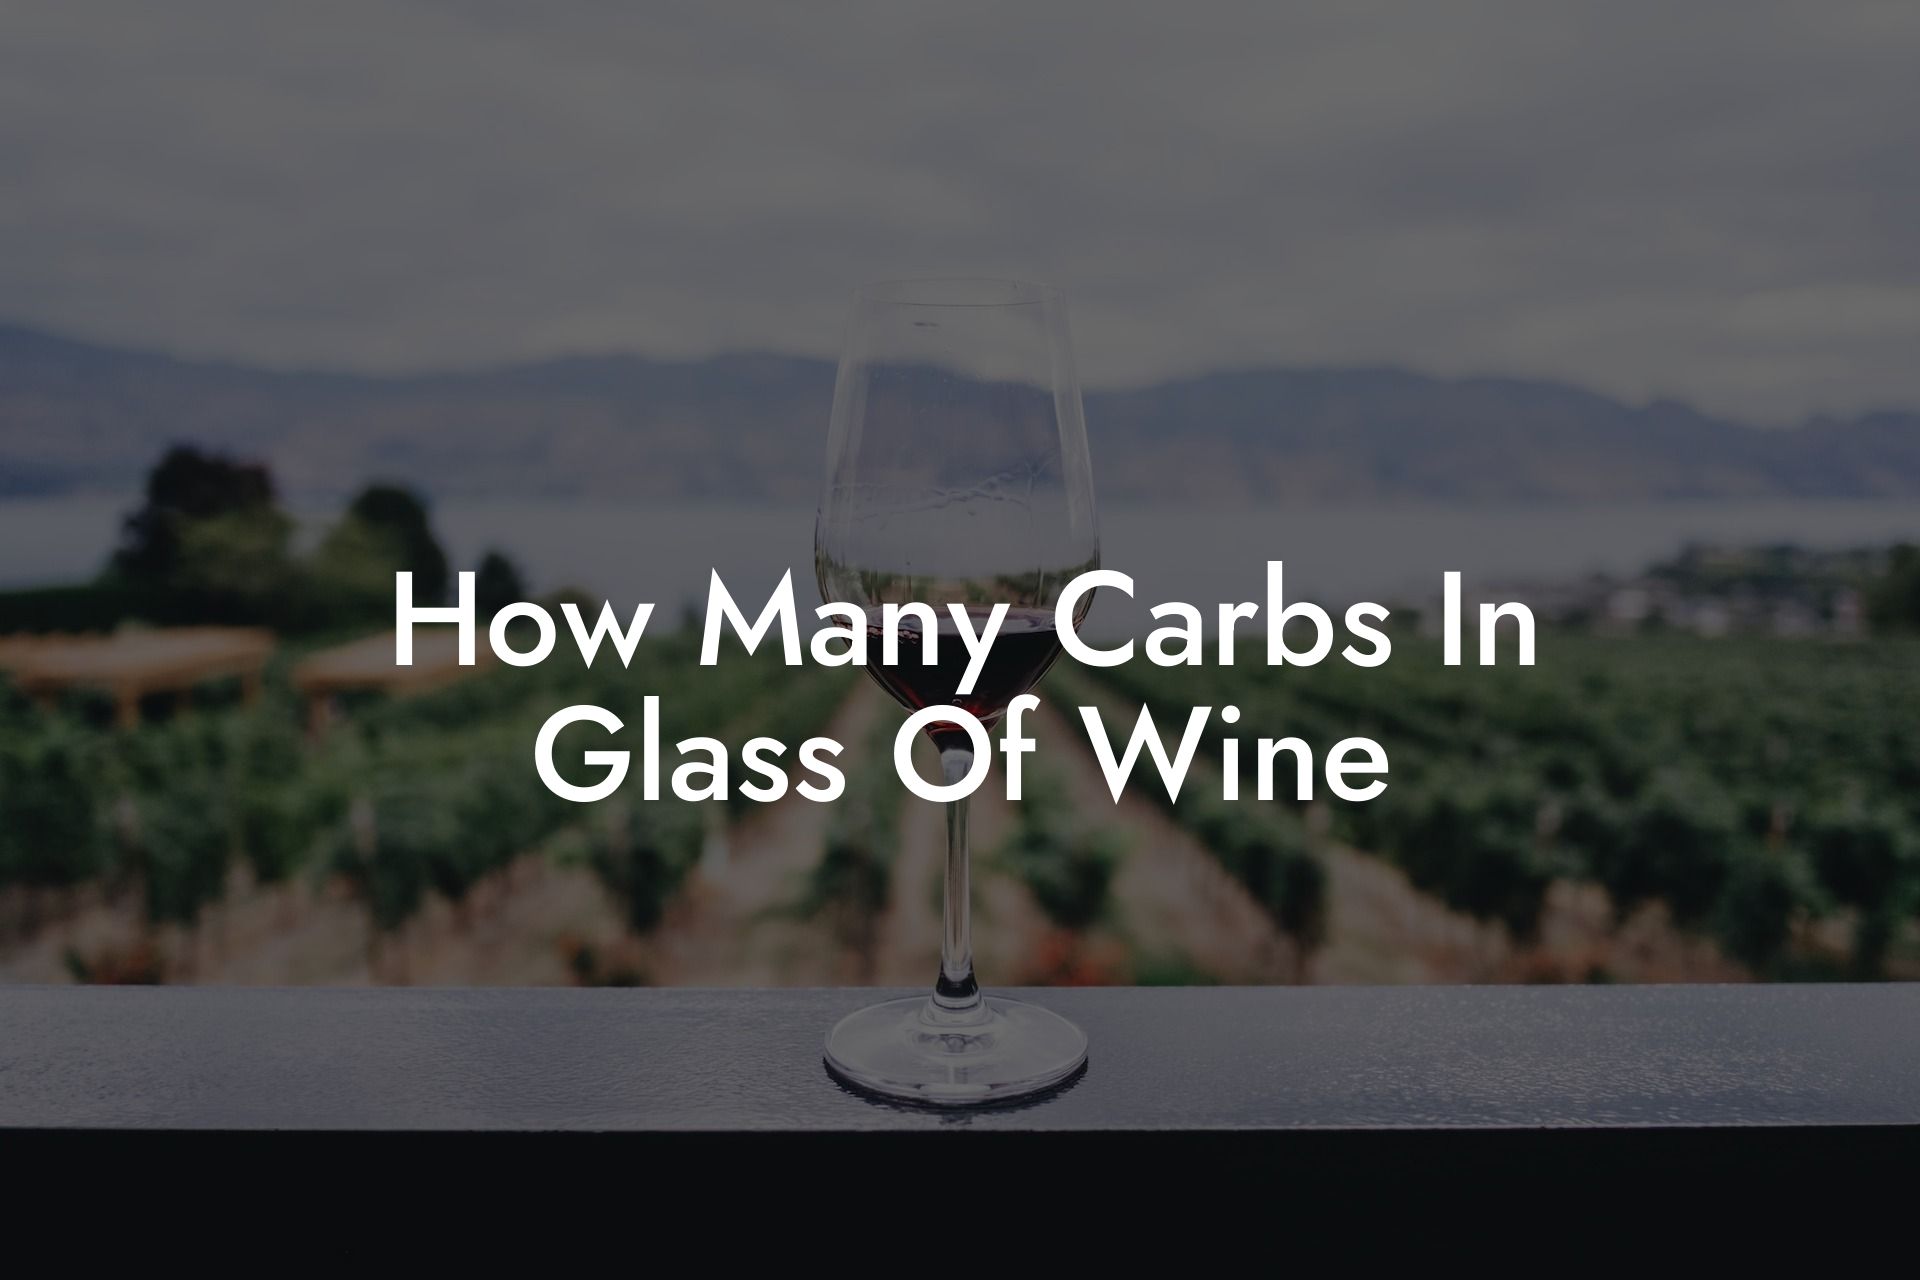 How Many Carbs In Glass Of Wine